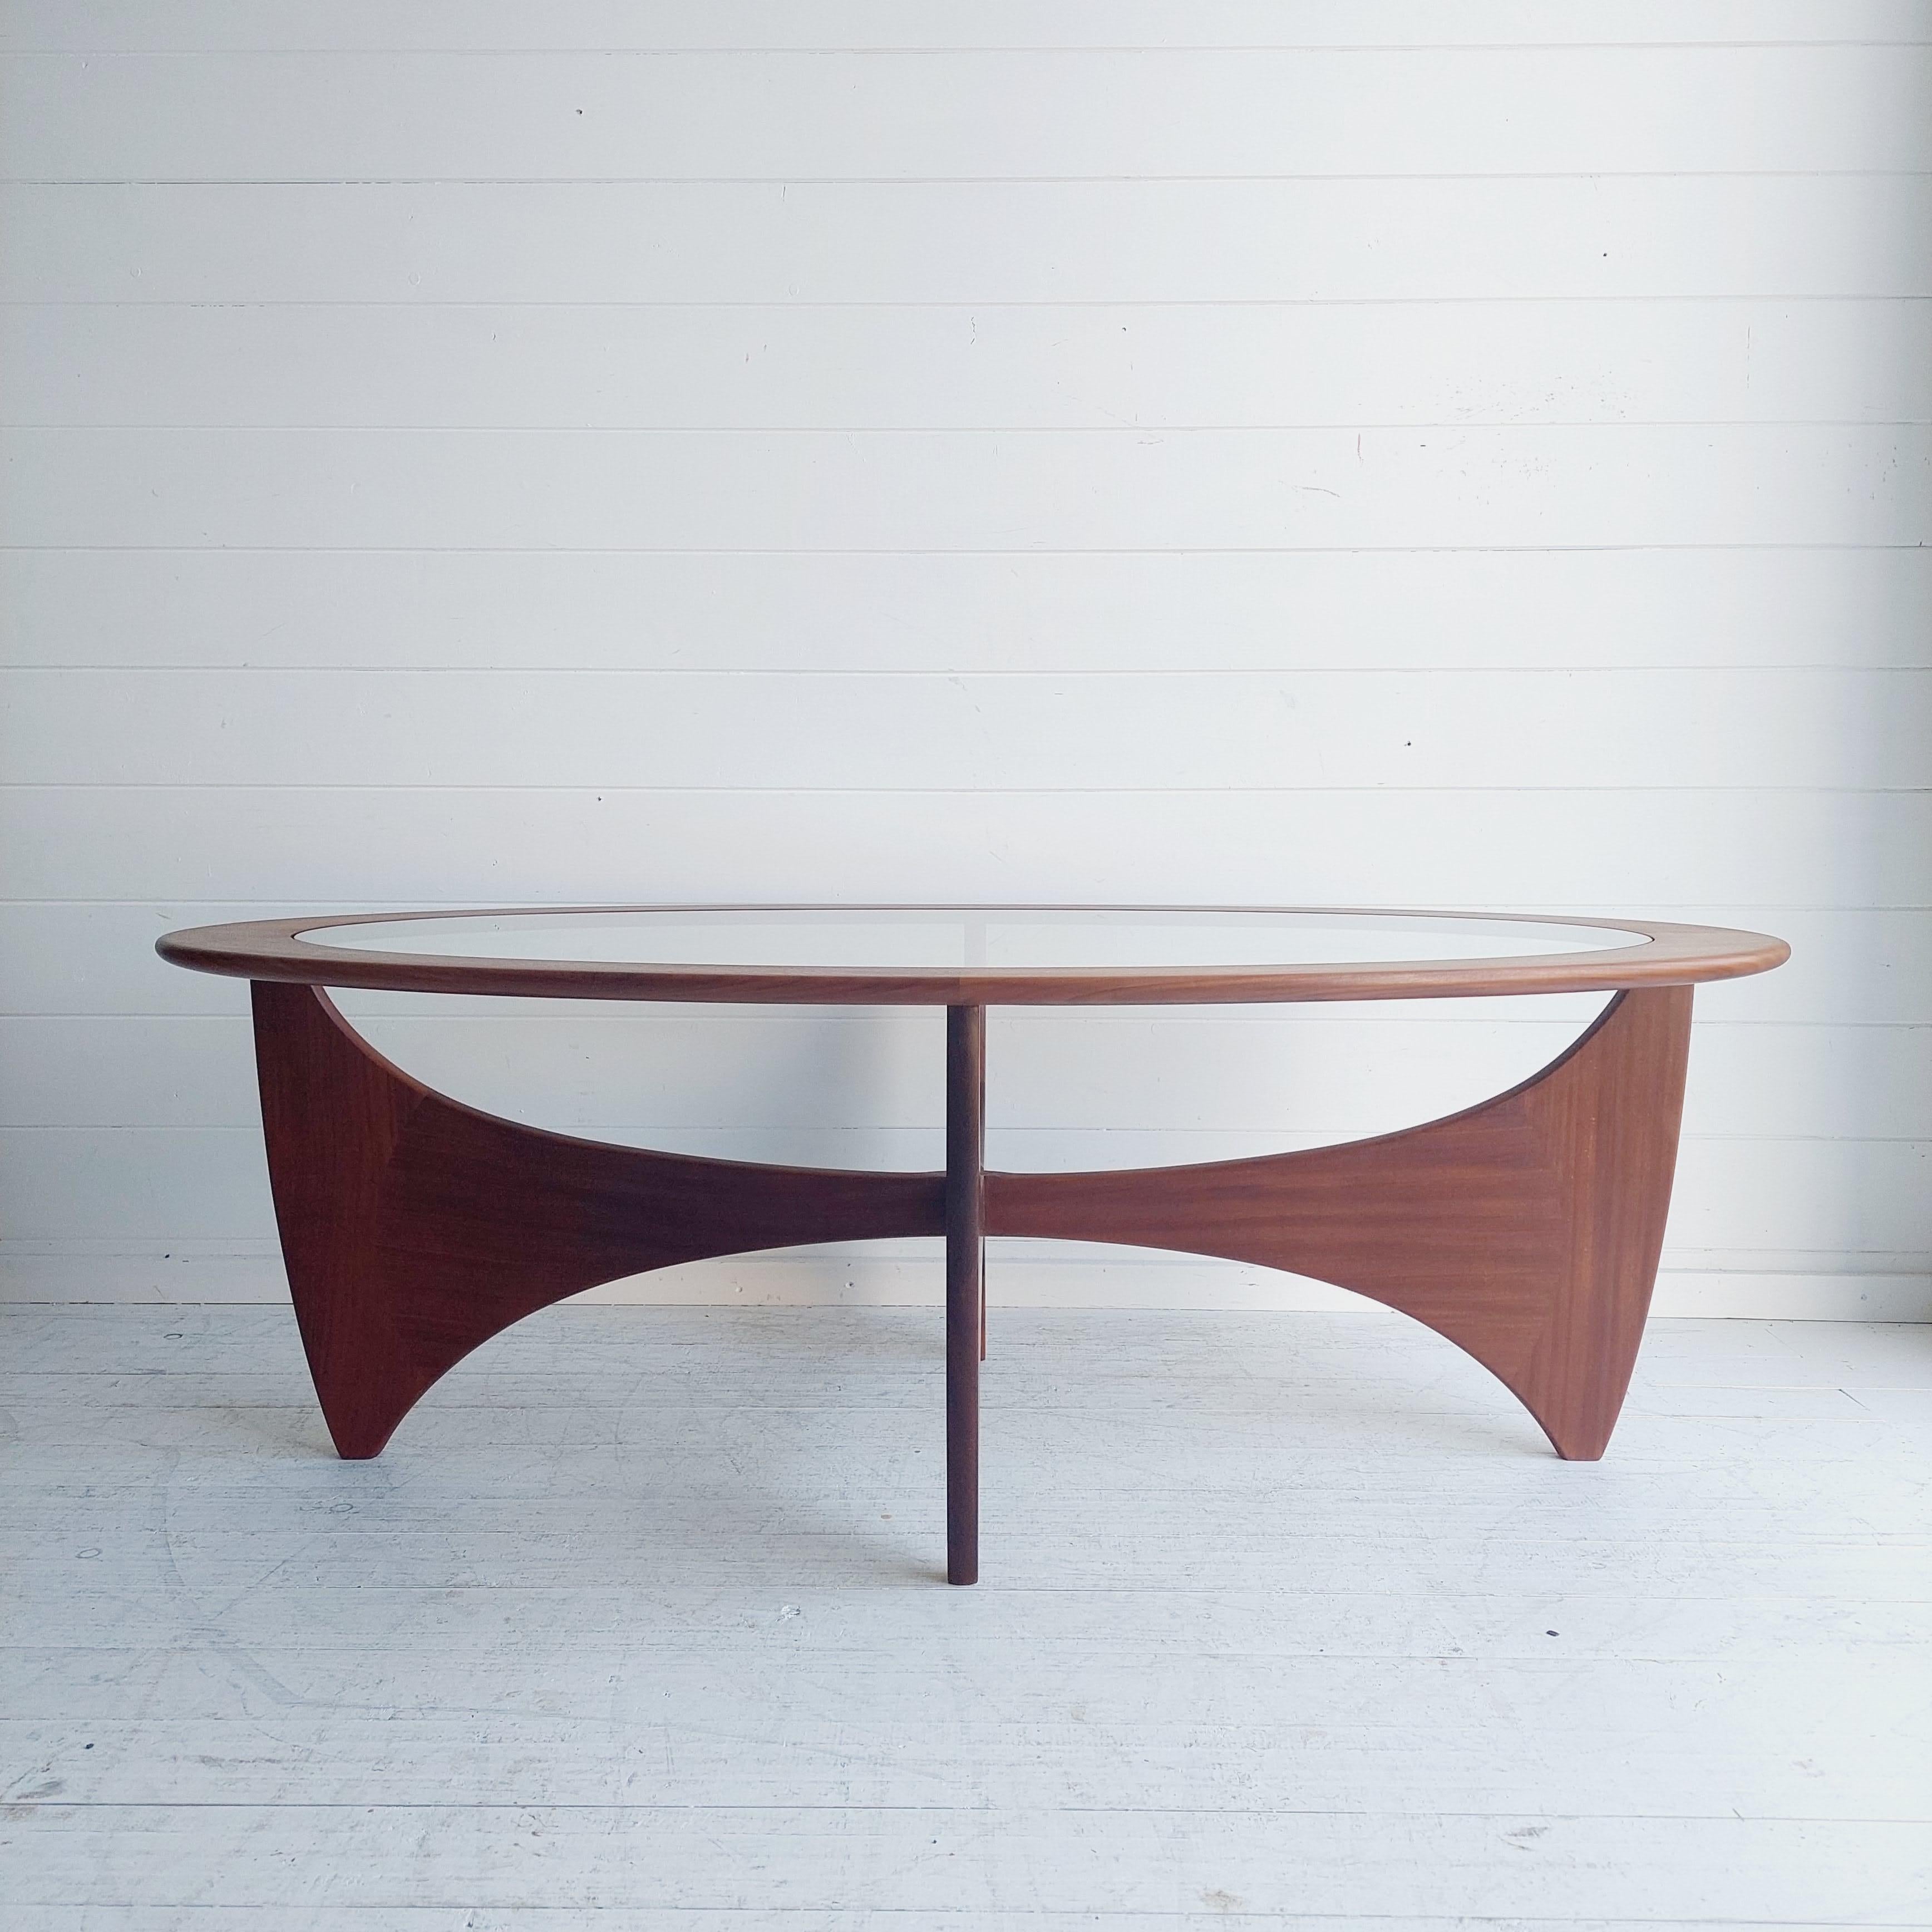 Mid century British teak and glass  Astro coffee table designed by Victor Wilkins for G Plan in the 1960s / 70s.
This restored piece is the oval shape which is harder to find.
This piece has a solid teak base (inspired by Isamu Noguchi ) complete